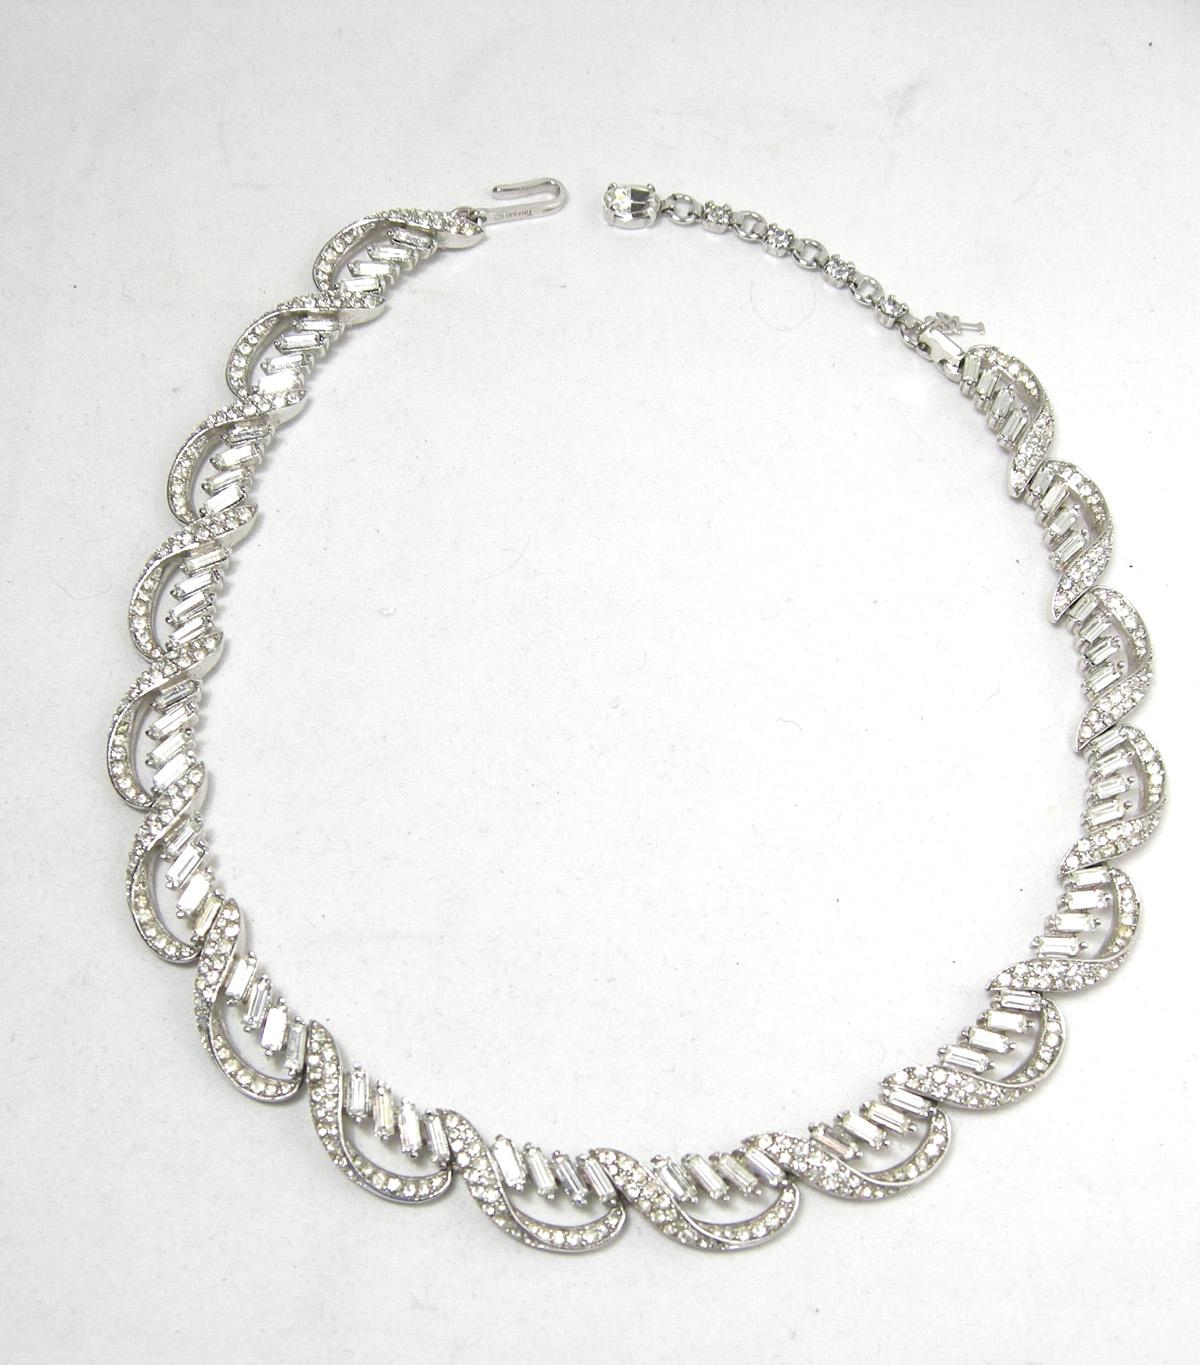 This signed Trifari has scalloped baguette rhinestones going around the necklace.  It is 15-1/2” x 1/2” wide with a hook clasp.  It has silver tone rhodium finish and is signed “Trifari”.   It also has the “T” hangtag and is in excellent condition.